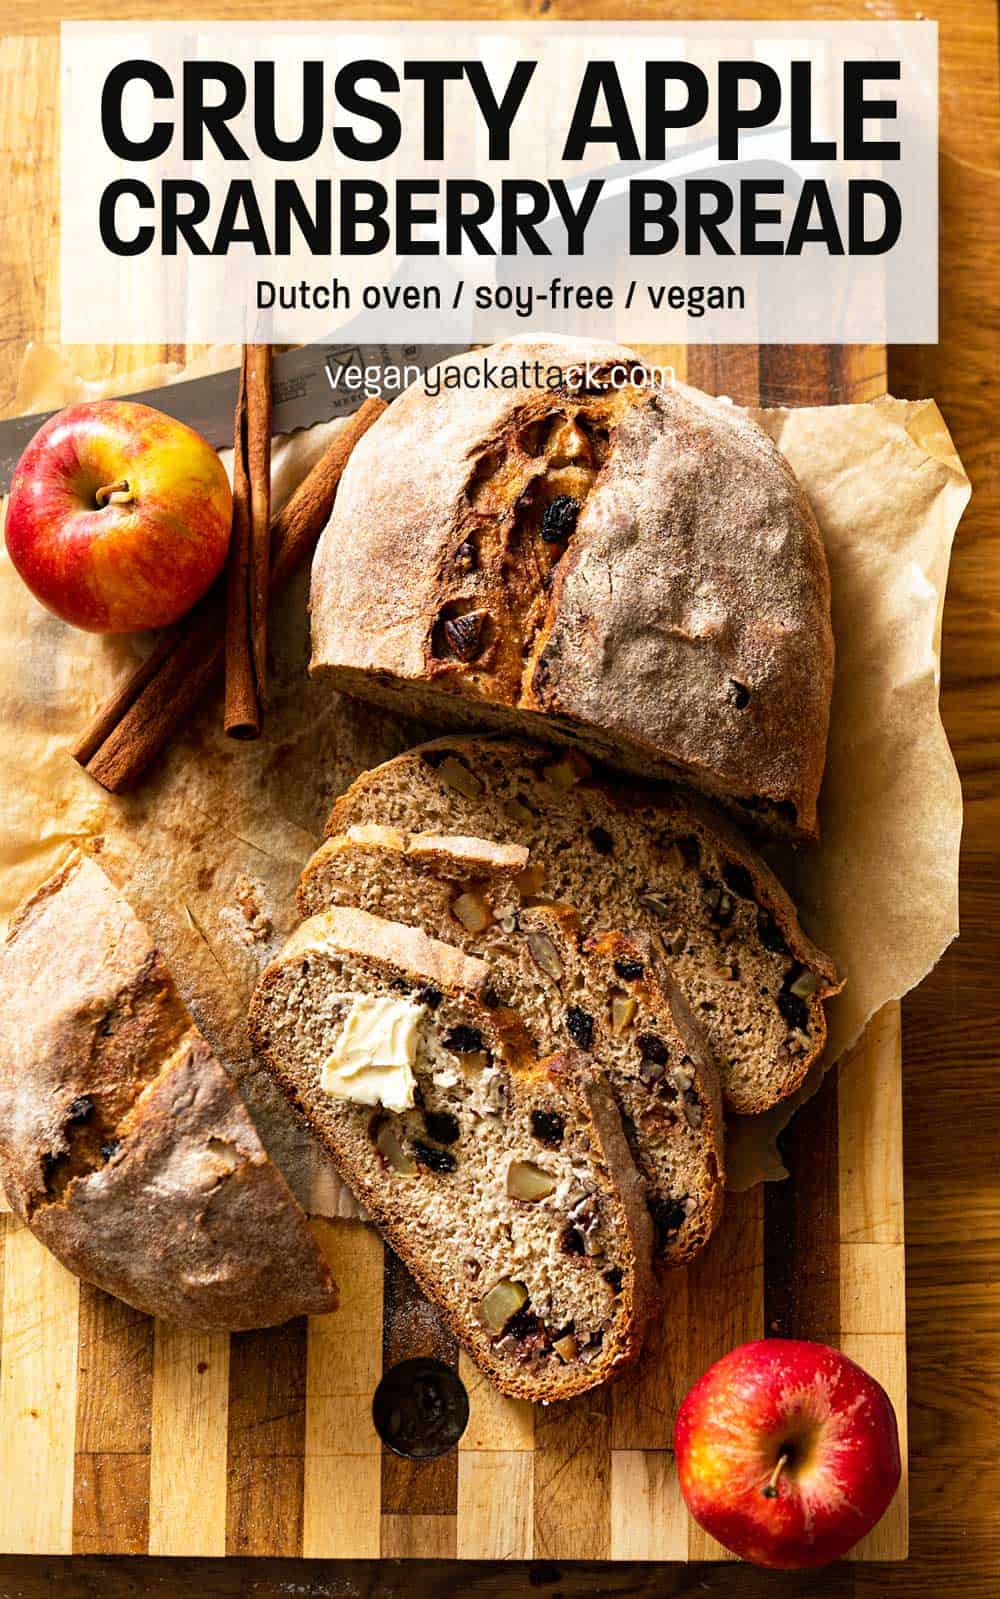 Loaf of whole wheat bread cut partially into slices on a cutting board with text reading "Crusty Apple Cranberry Dutch Oven Bread"